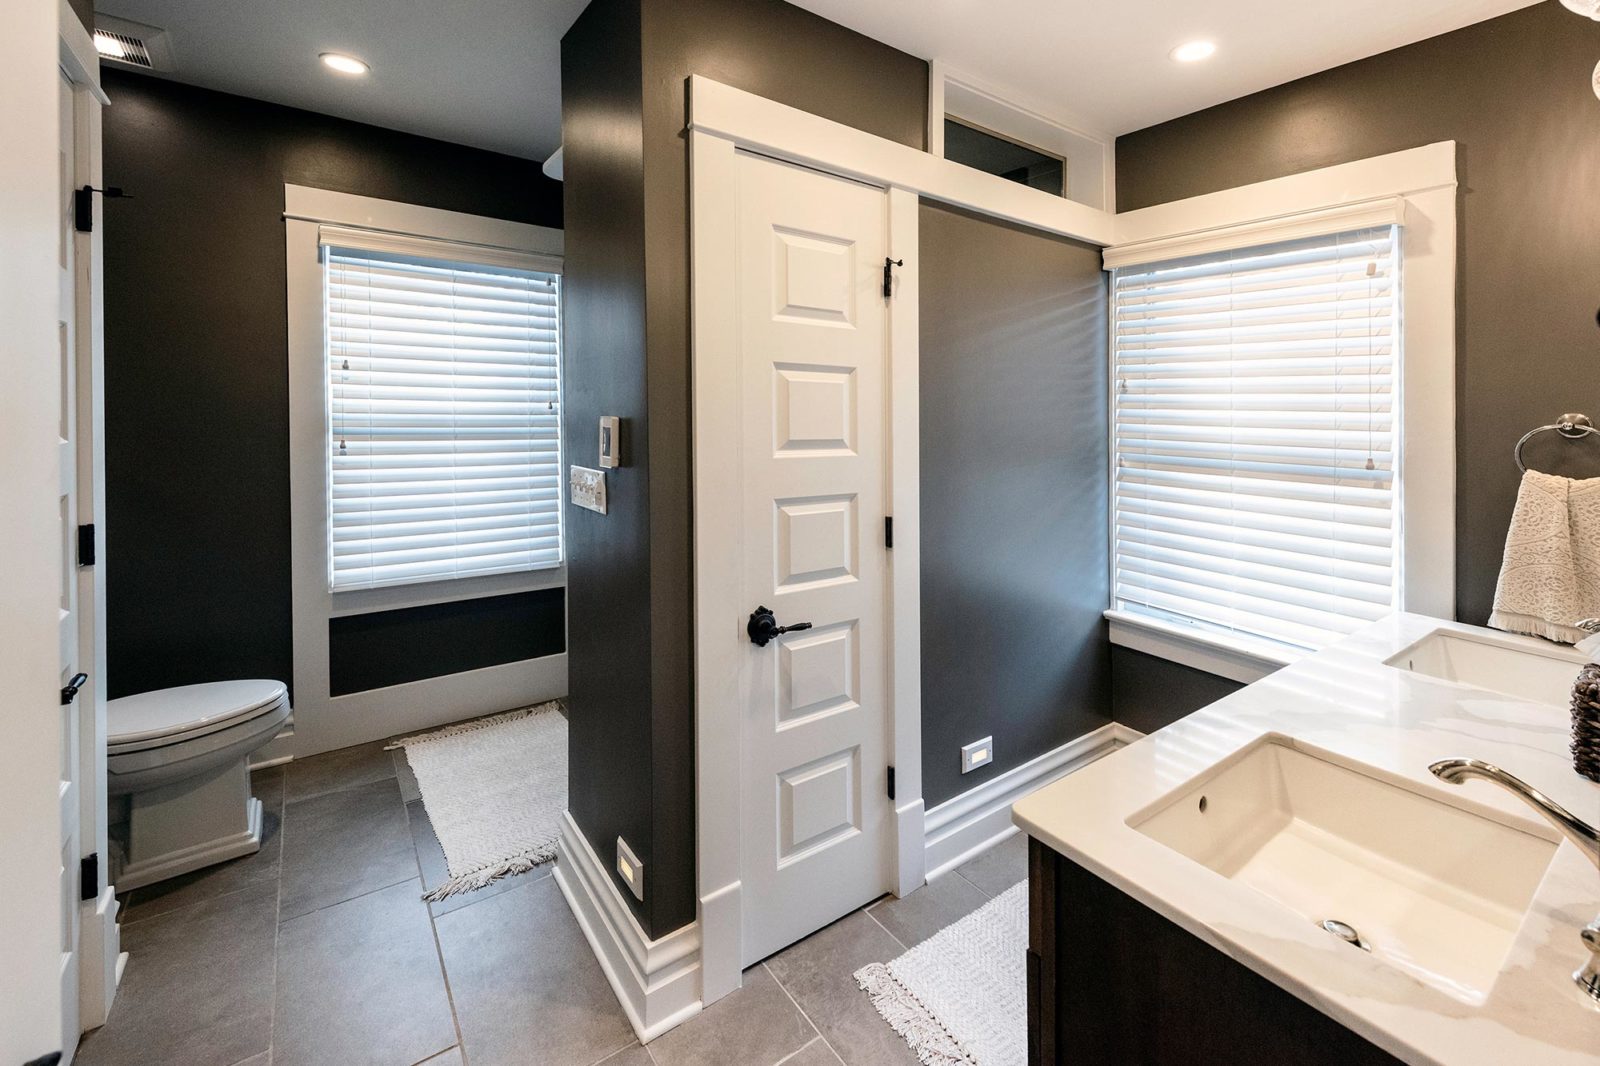 U-shaped bathroom with grey walls, toilet, white sinks, small closet, two exterior windows